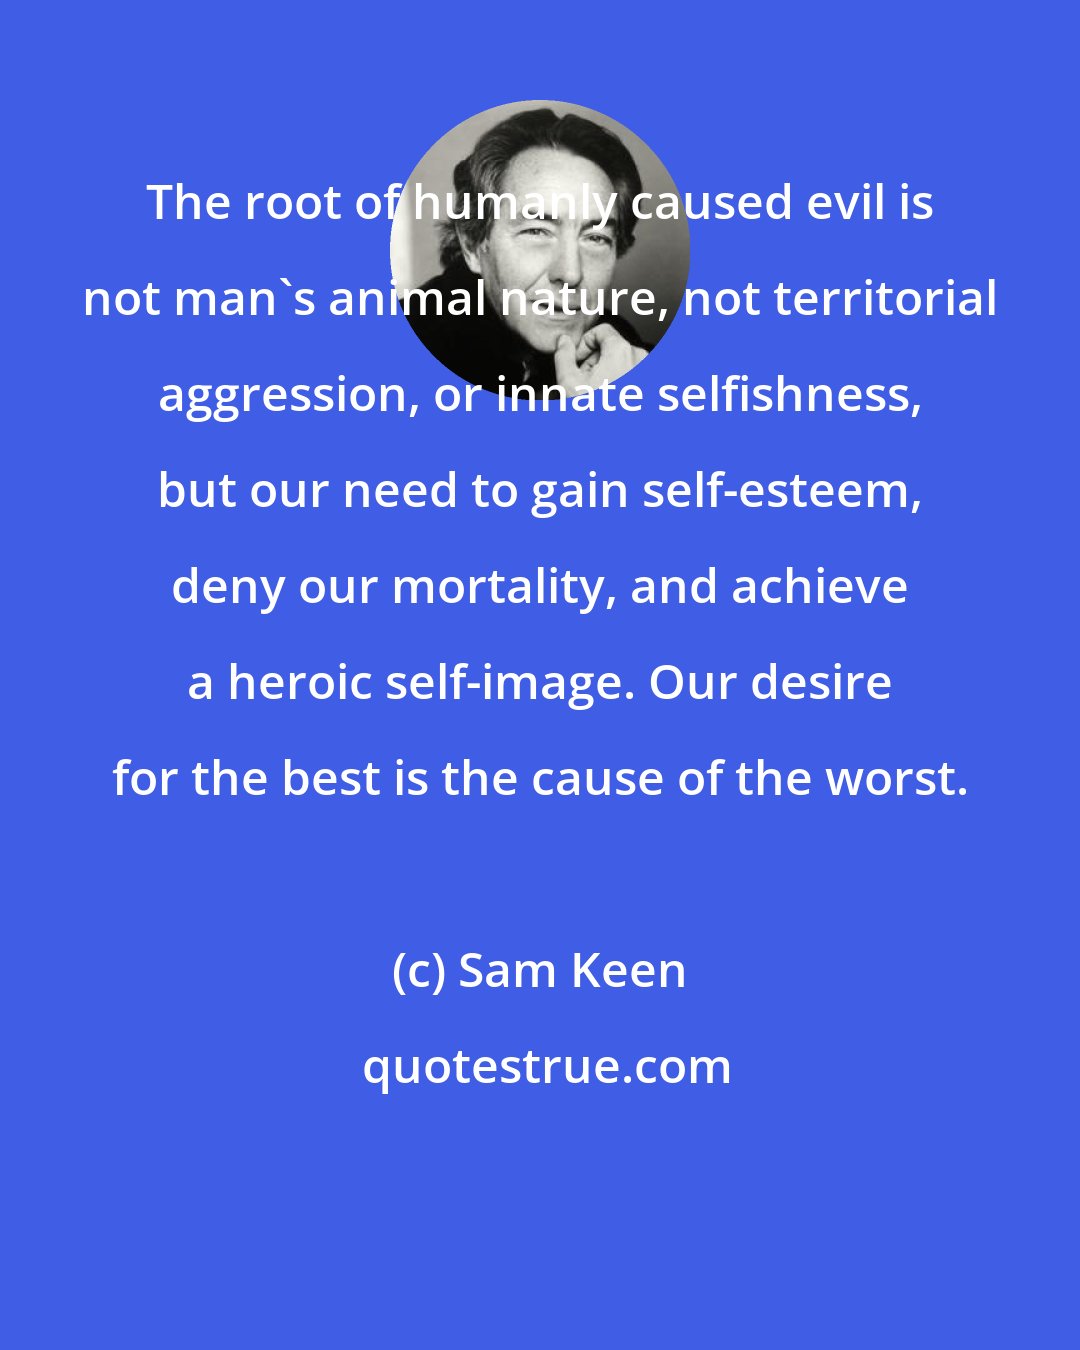 Sam Keen: The root of humanly caused evil is not man's animal nature, not territorial aggression, or innate selfishness, but our need to gain self-esteem, deny our mortality, and achieve a heroic self-image. Our desire for the best is the cause of the worst.